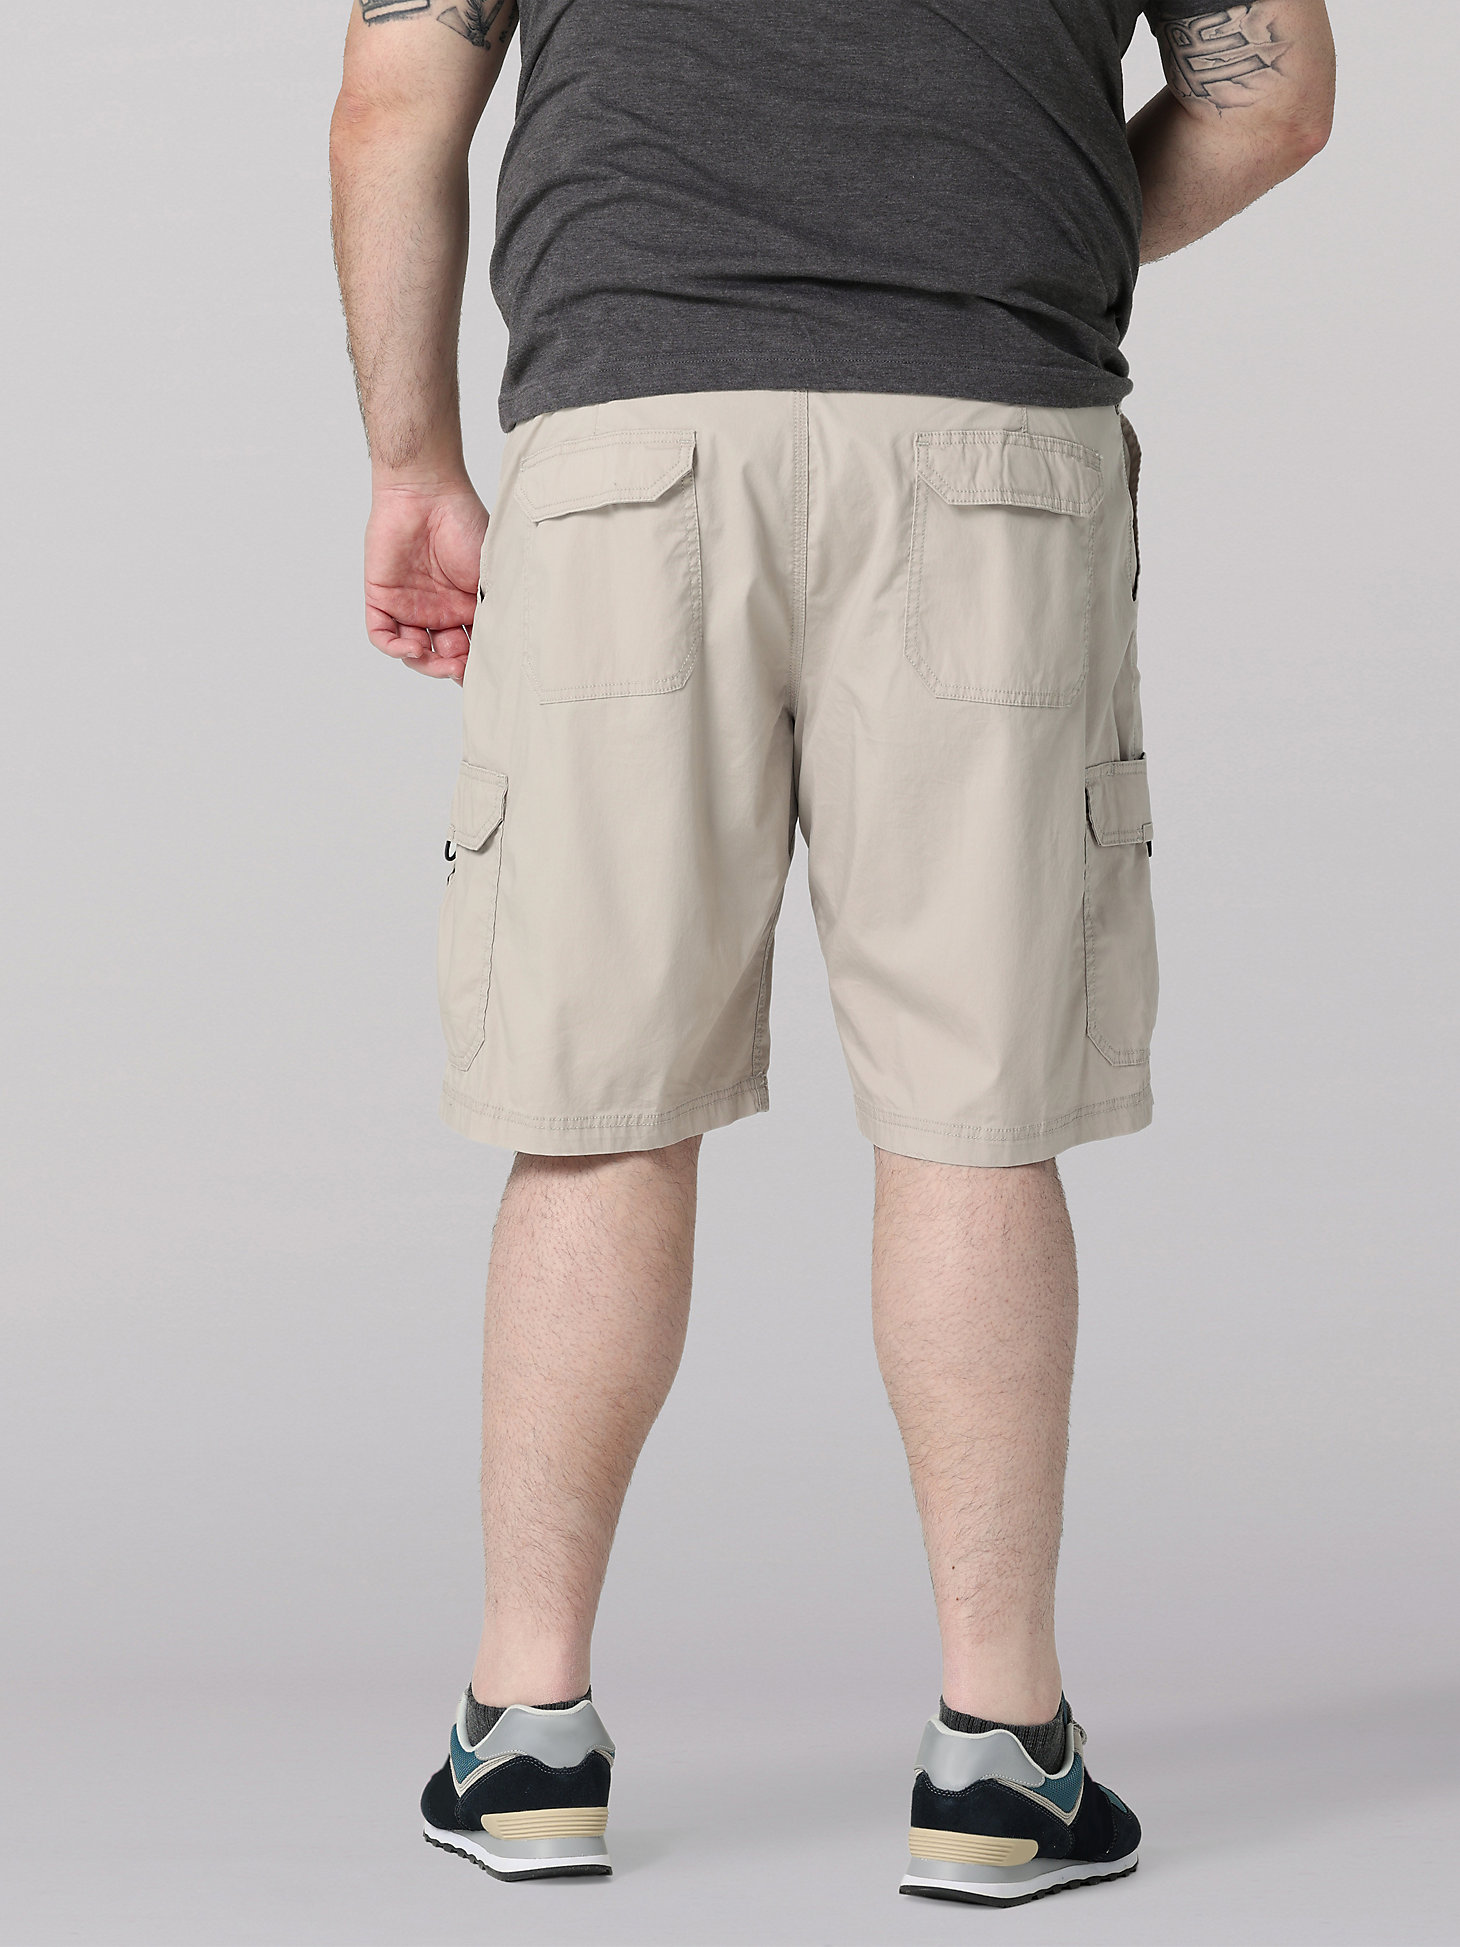 Men's Extreme Motion Crossroad Short (Big & Tall) in Stone alternative view 1